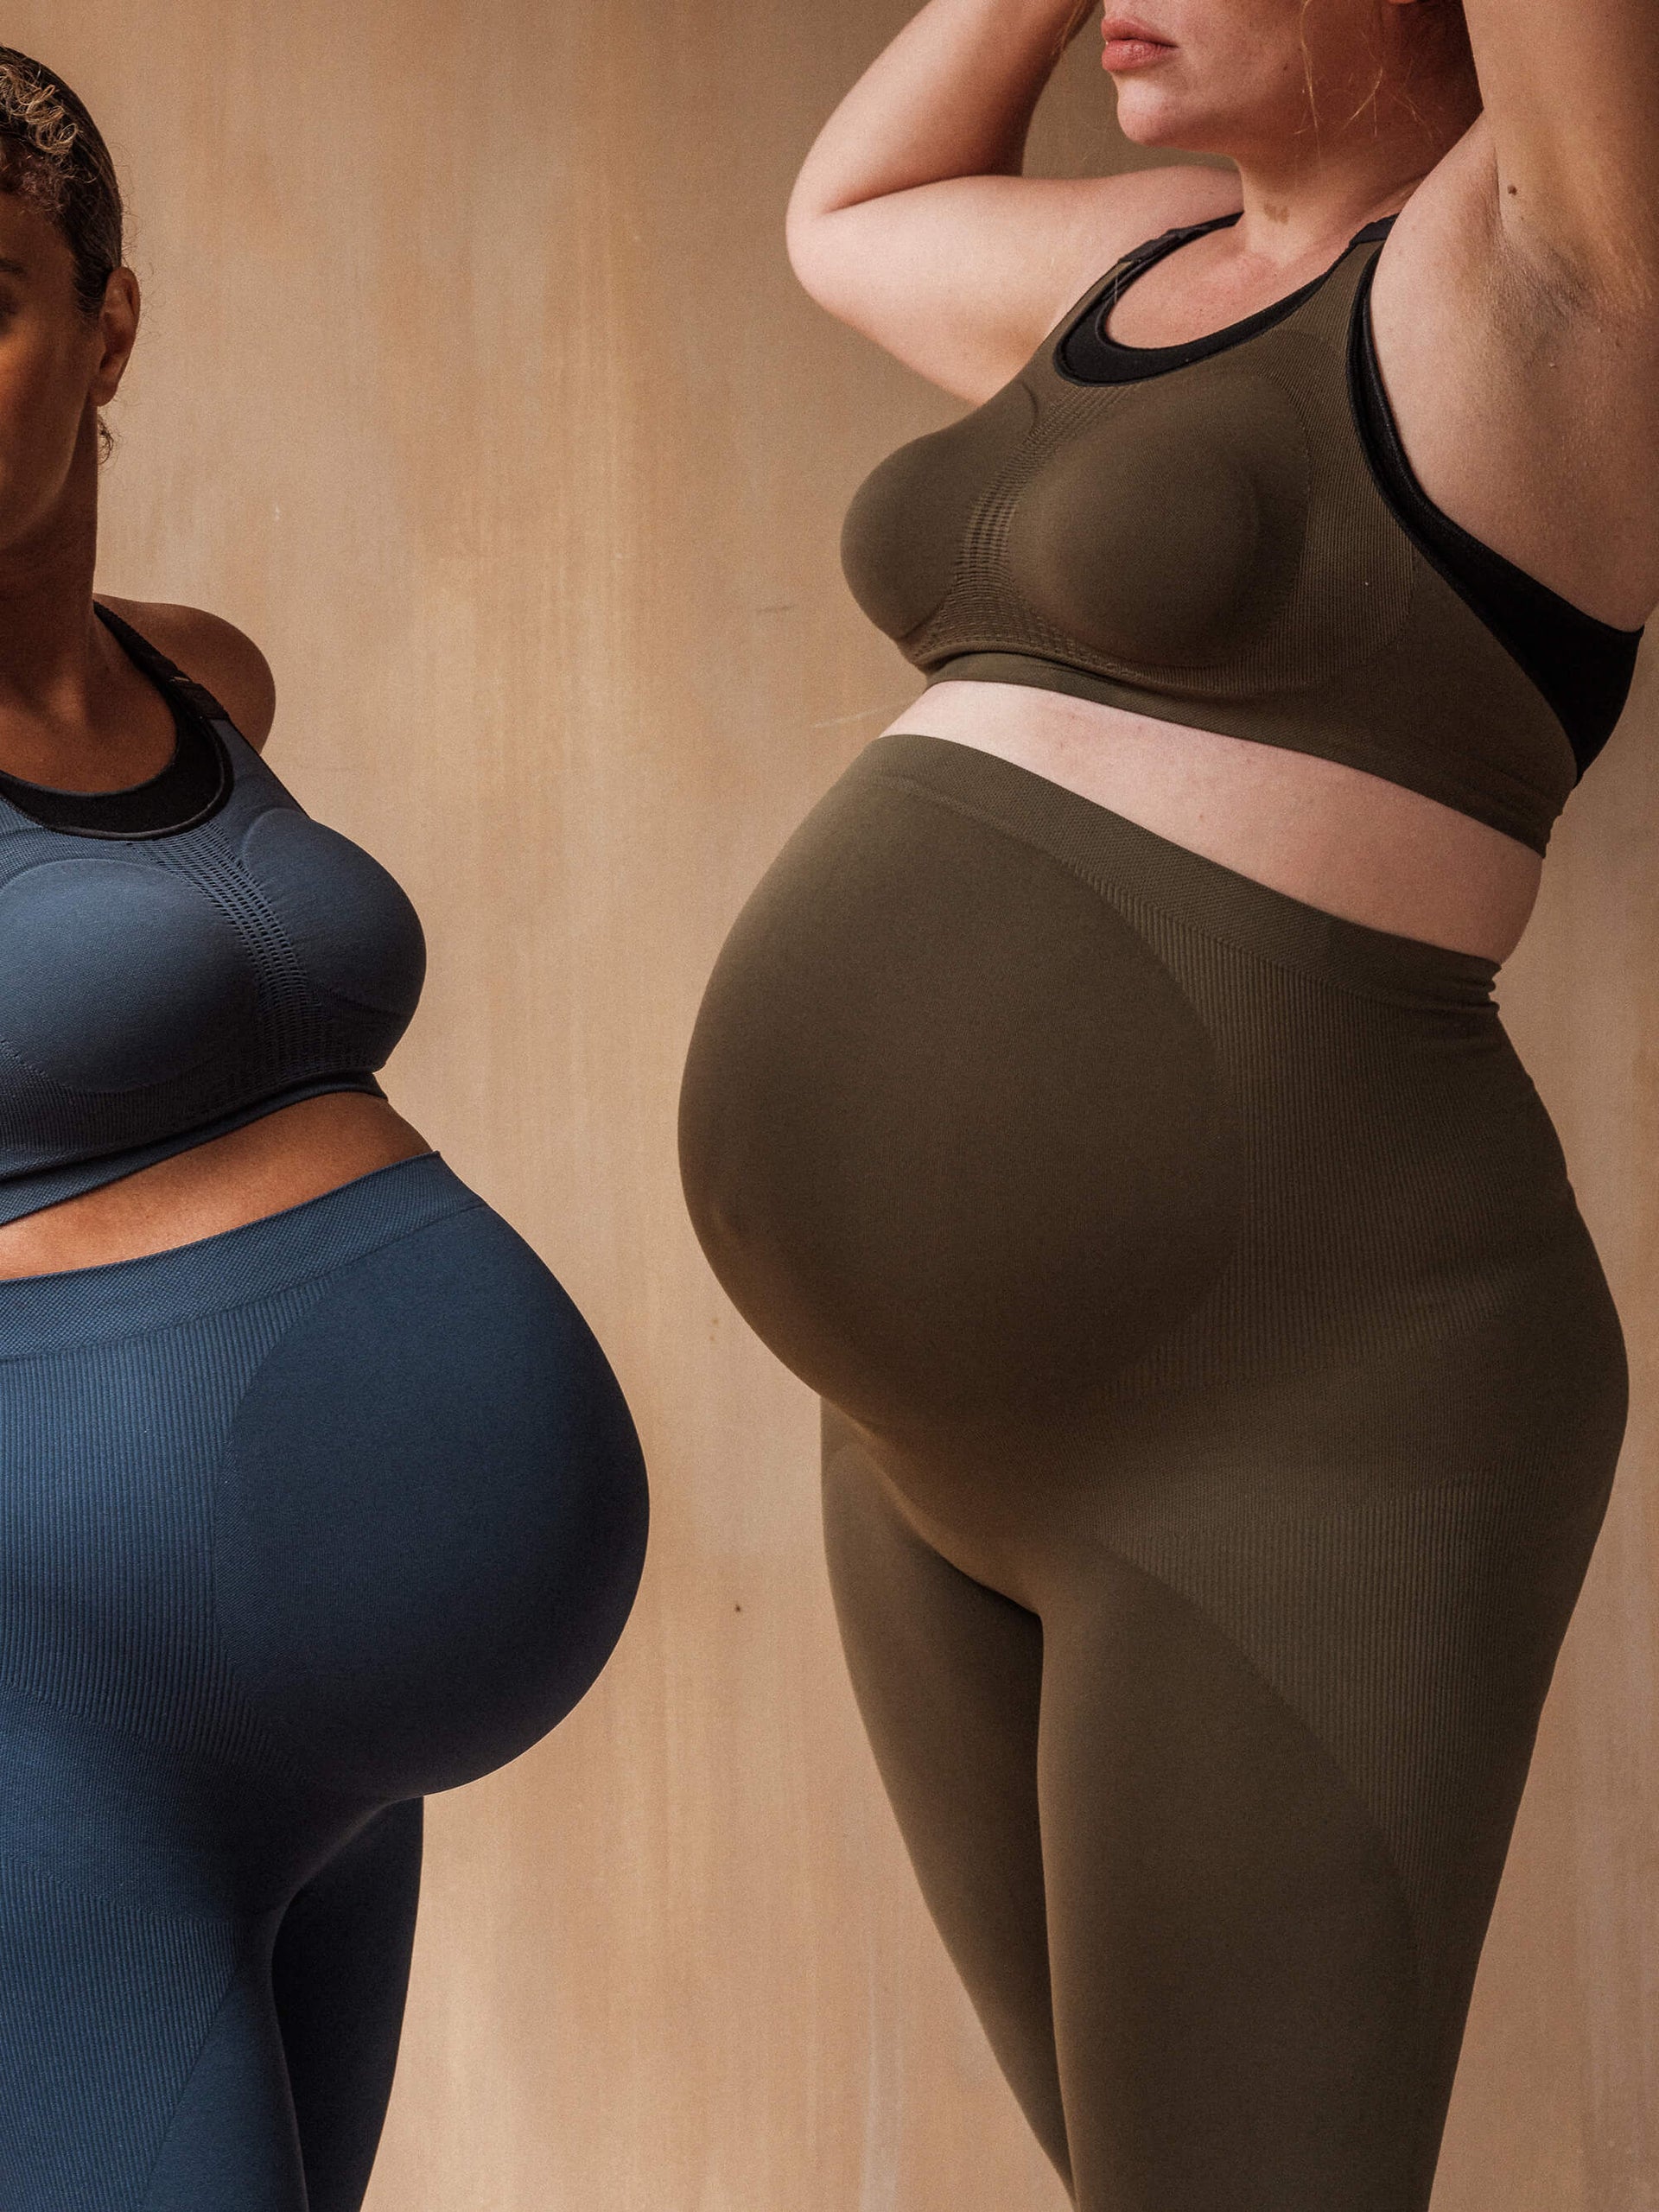 Jorgen House image of two women wearing the midnight blue and dark olive green maternity breastfeeding bra and high waist leggings on pregnant female bodies